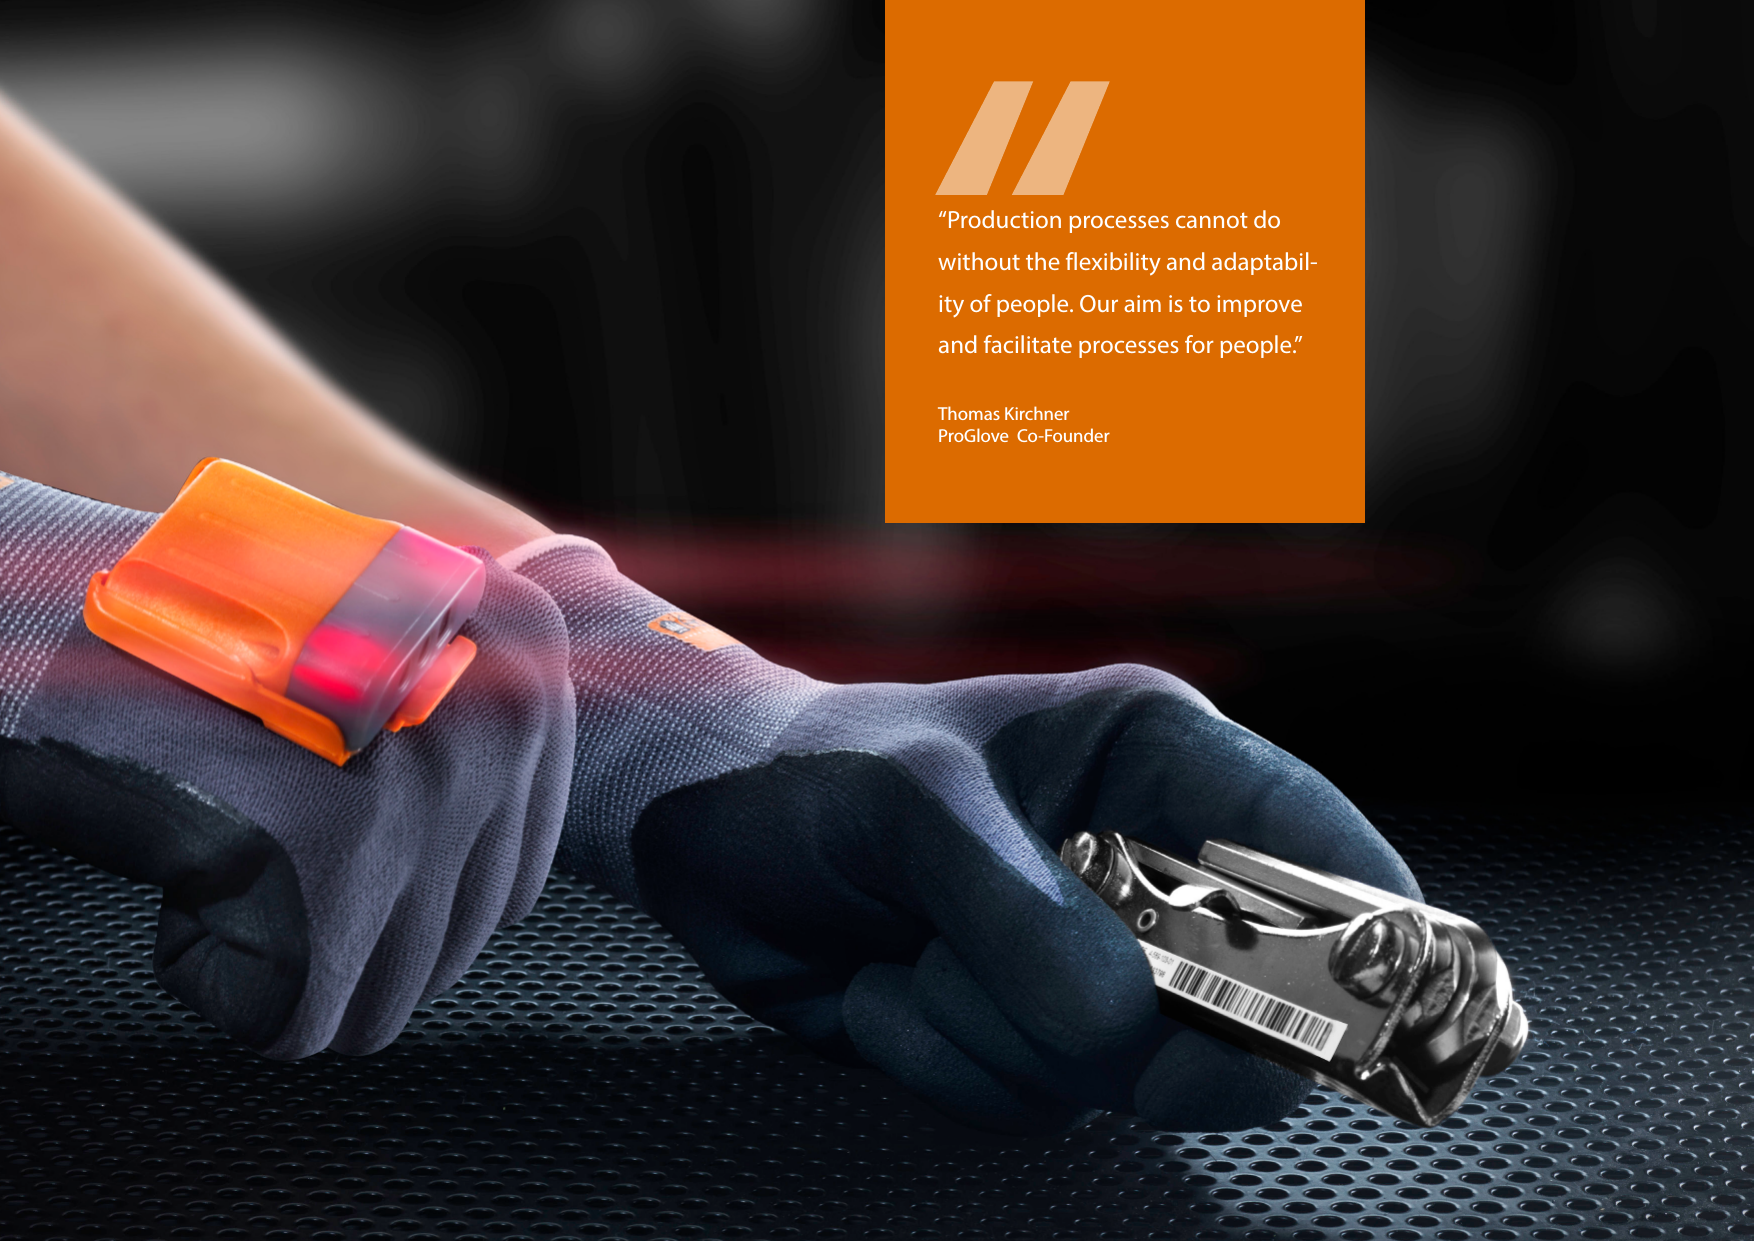 2ProGlove Mark - User Manual“Production processes cannot do without the flexibility and adaptabil-ity of people. Our aim is to improve and facilitate processes for people.”Thomas KirchnerProGlove  Co-Founder